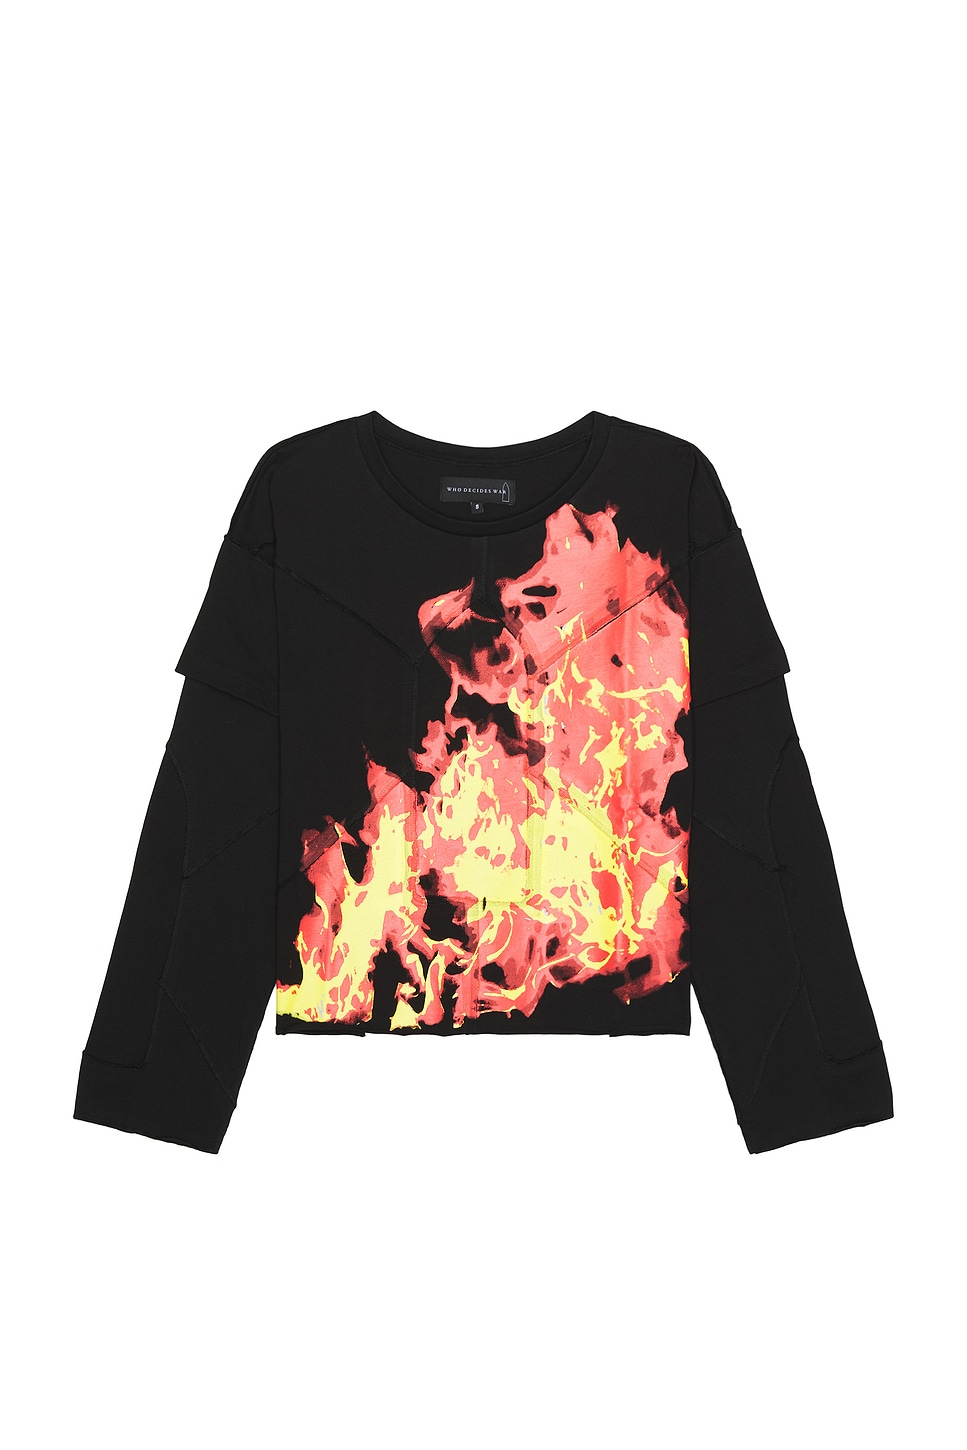 Image 1 of Who Decides War by Ev Bravado Flame Long Sleeve T-shirt in Coal